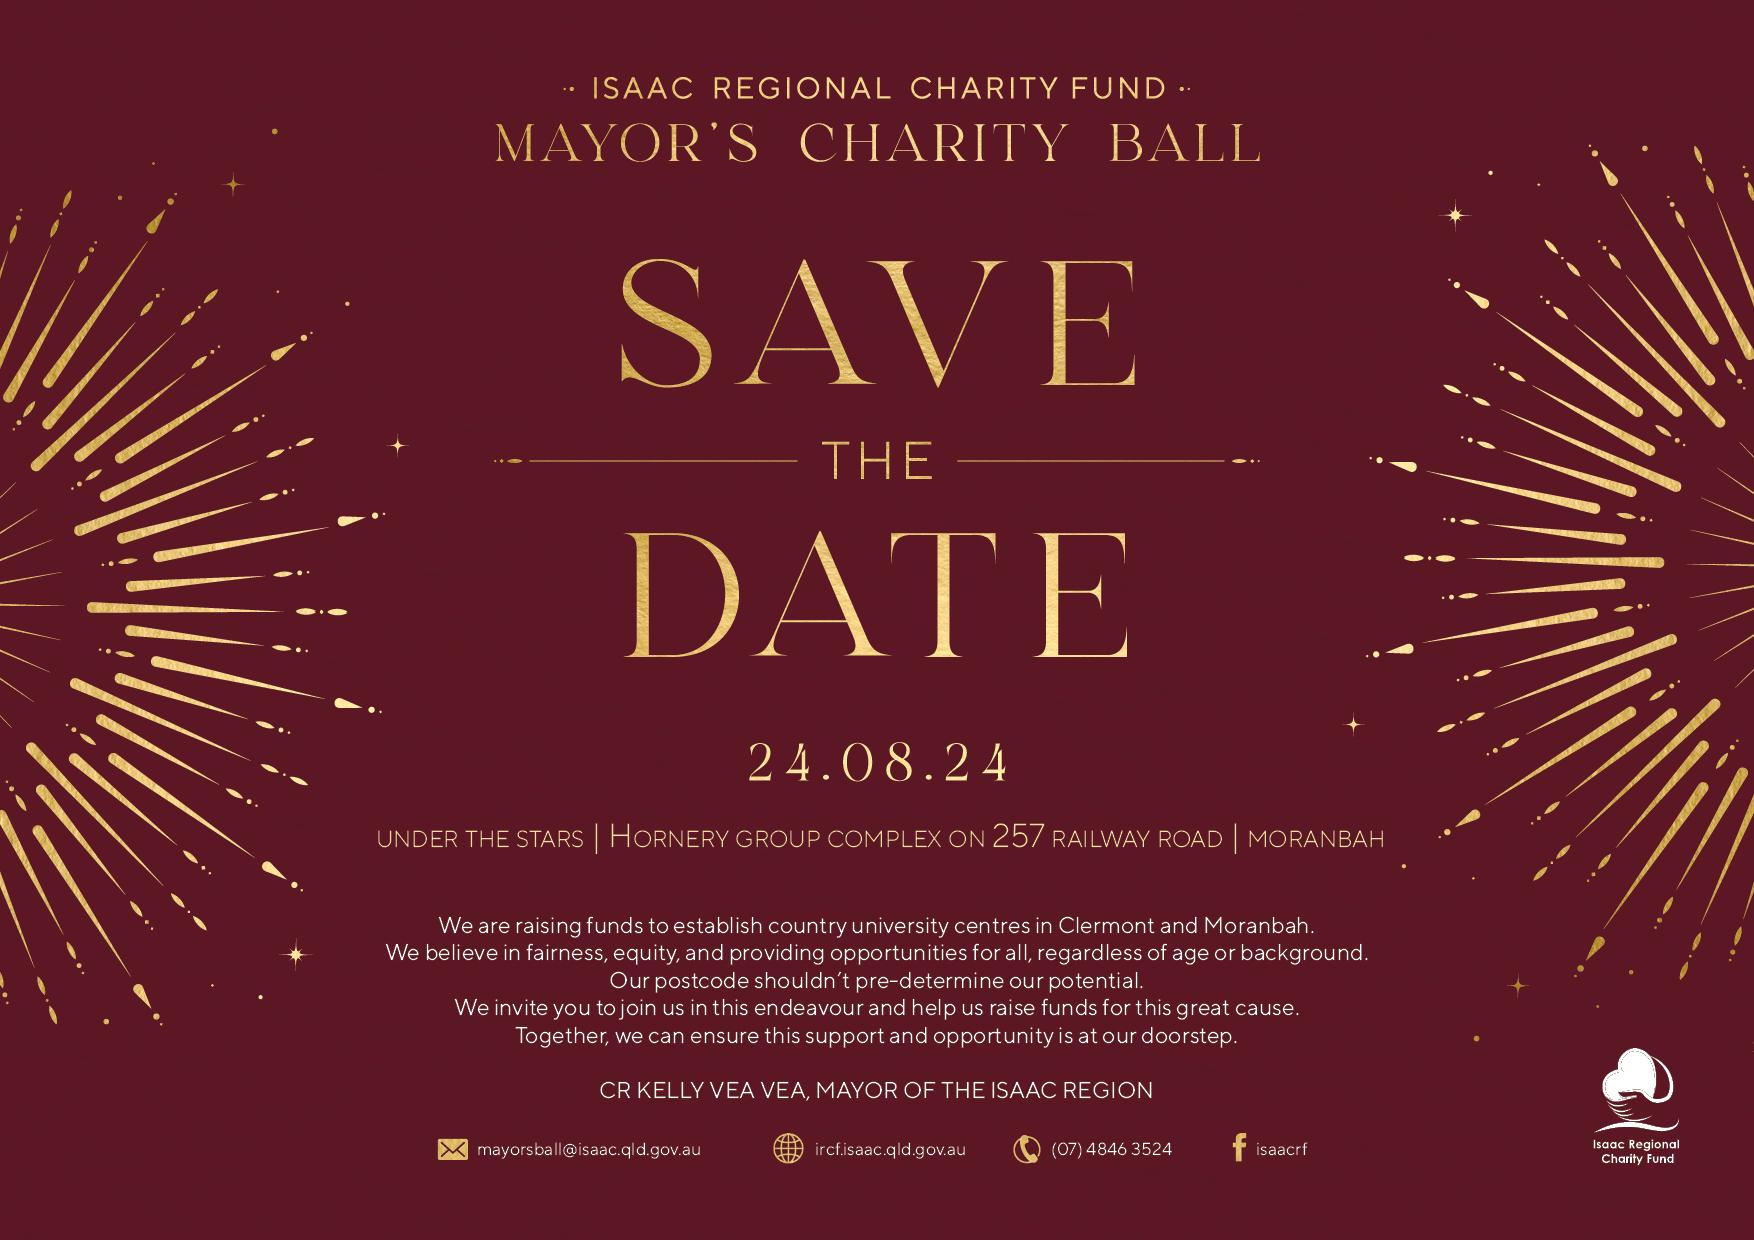 Save the date for the mayor's charity ball this august 24, 2024